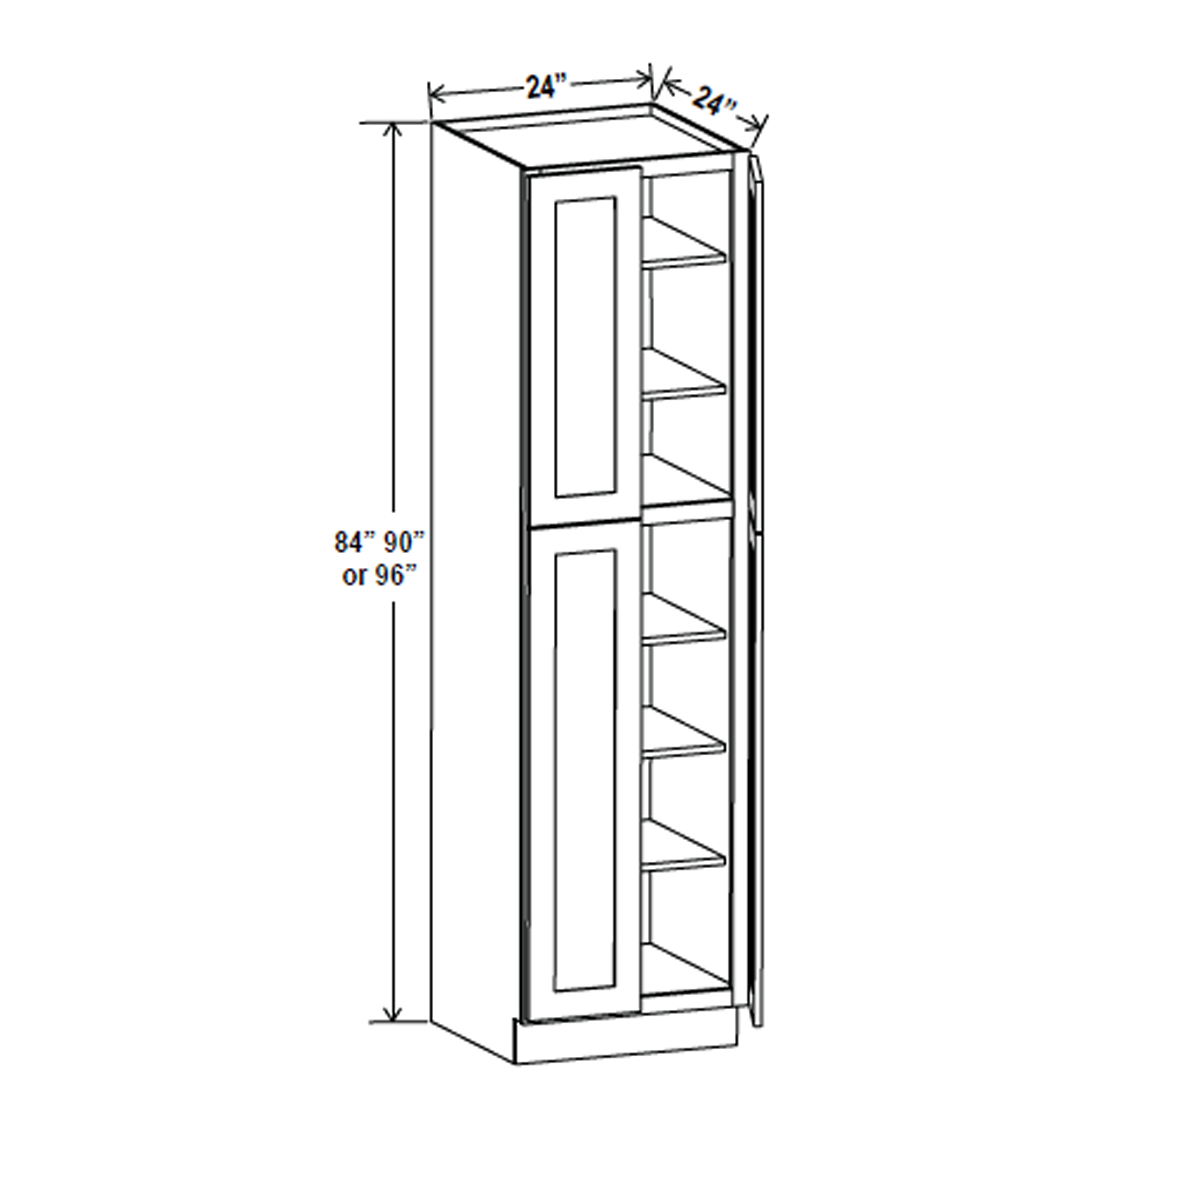 Wall Pantry Cabinet - 24W x 90H x 24D - Aria White Shaker